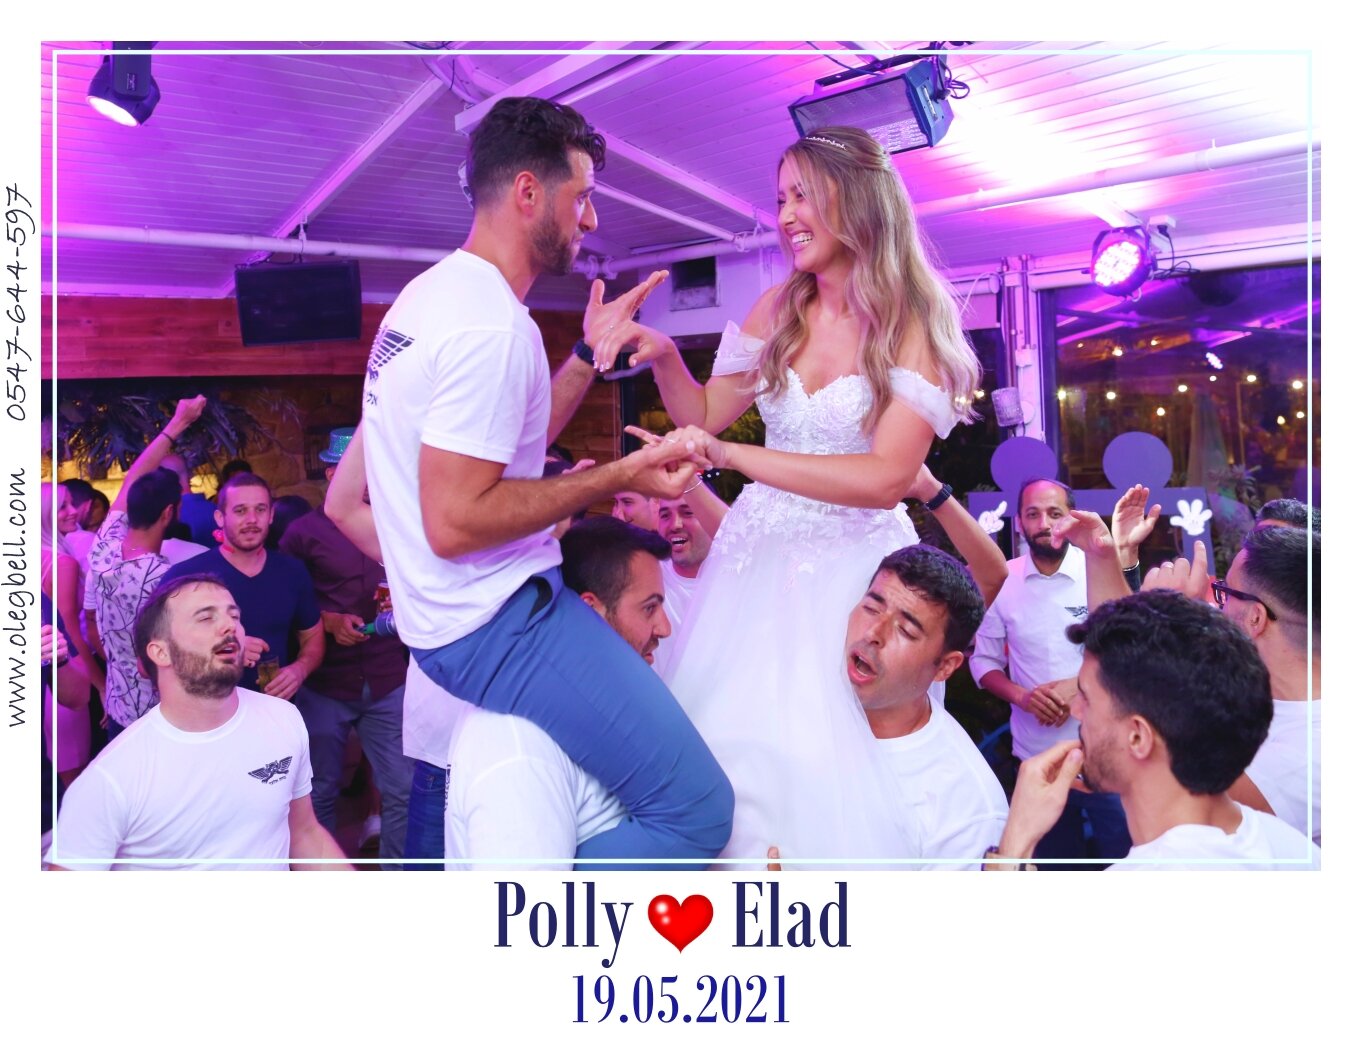 POLLY_AND_ELAD_WD_MG_SITE_034.JPG